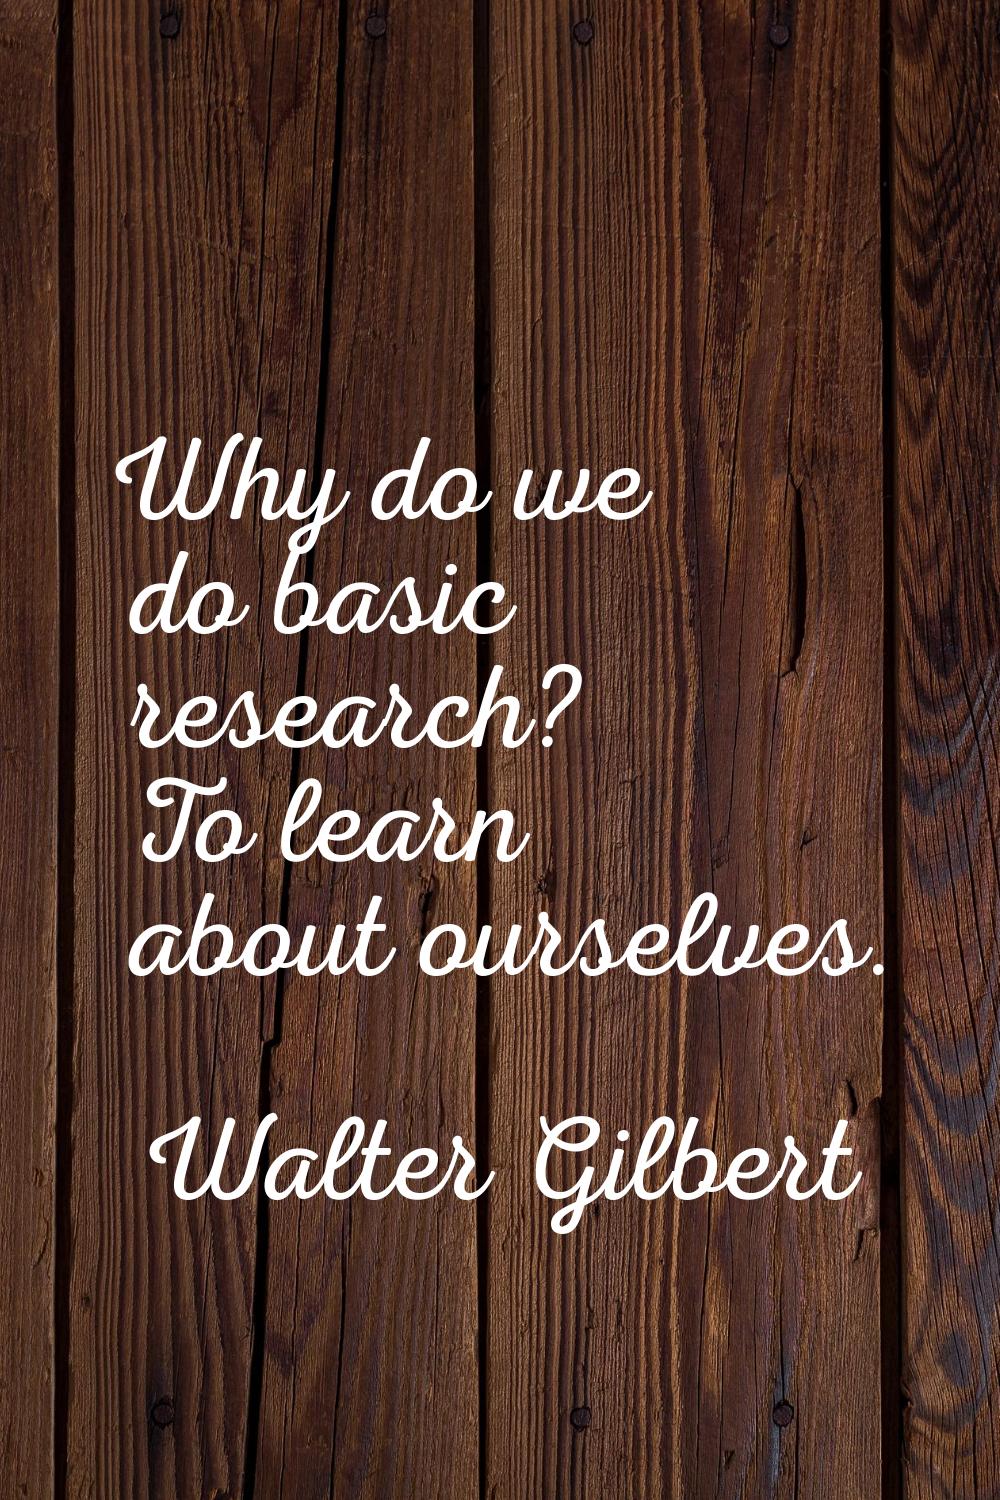 Why do we do basic research? To learn about ourselves.